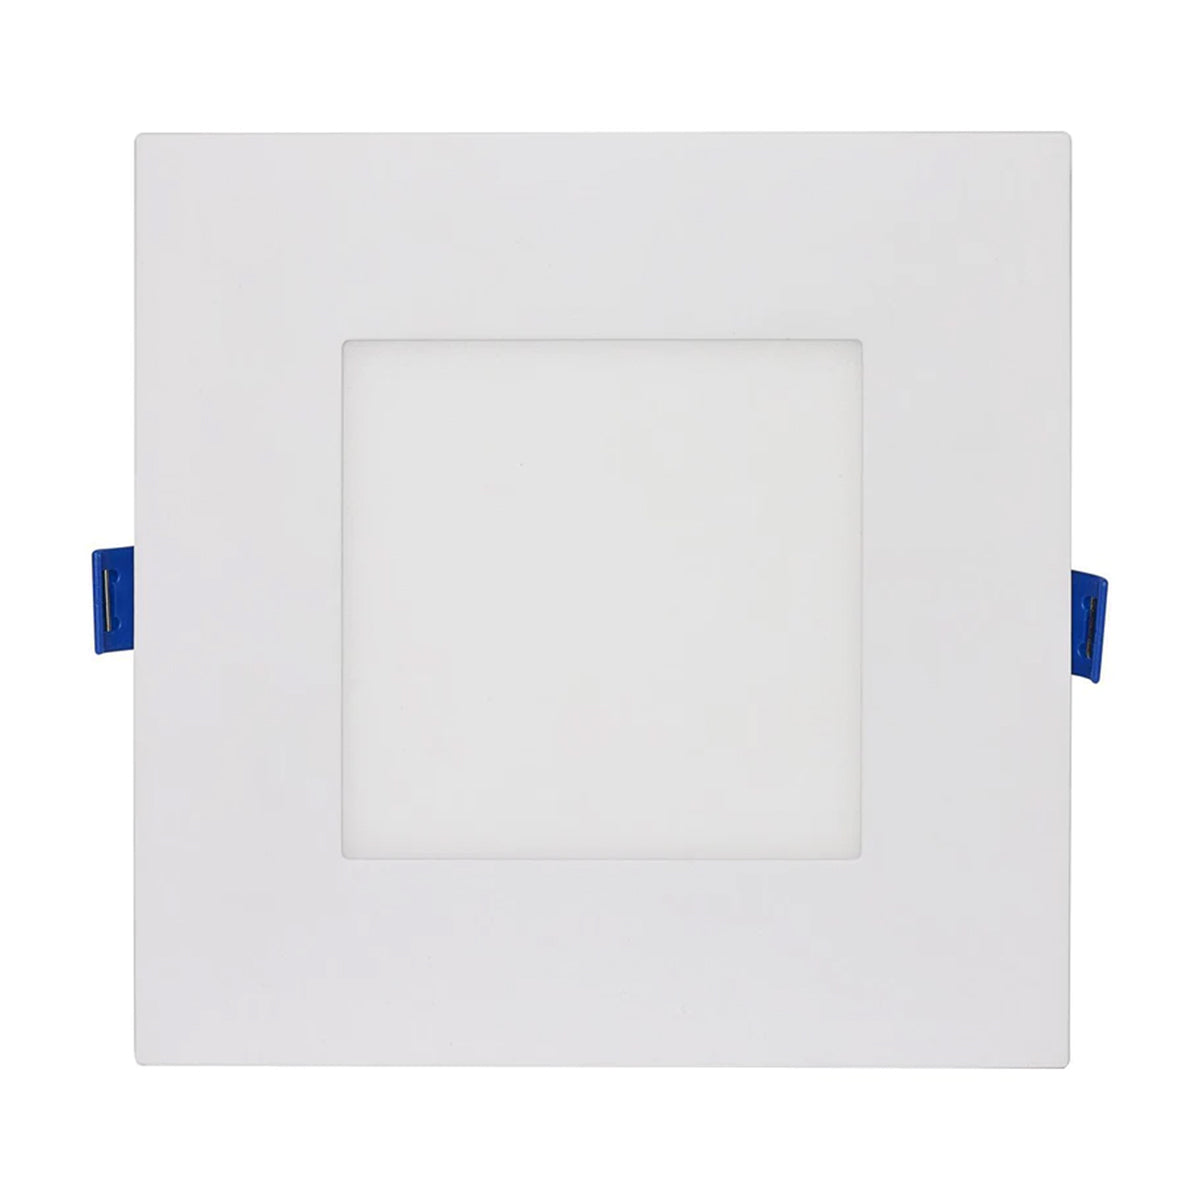 Satco Starfish, Flat Lens, 6 inch, Square Smart Canless LED Recessed Light, 12 Watt, 750 Lumens, Selectable CCT 2000K to 5000K RGB/Tunable White